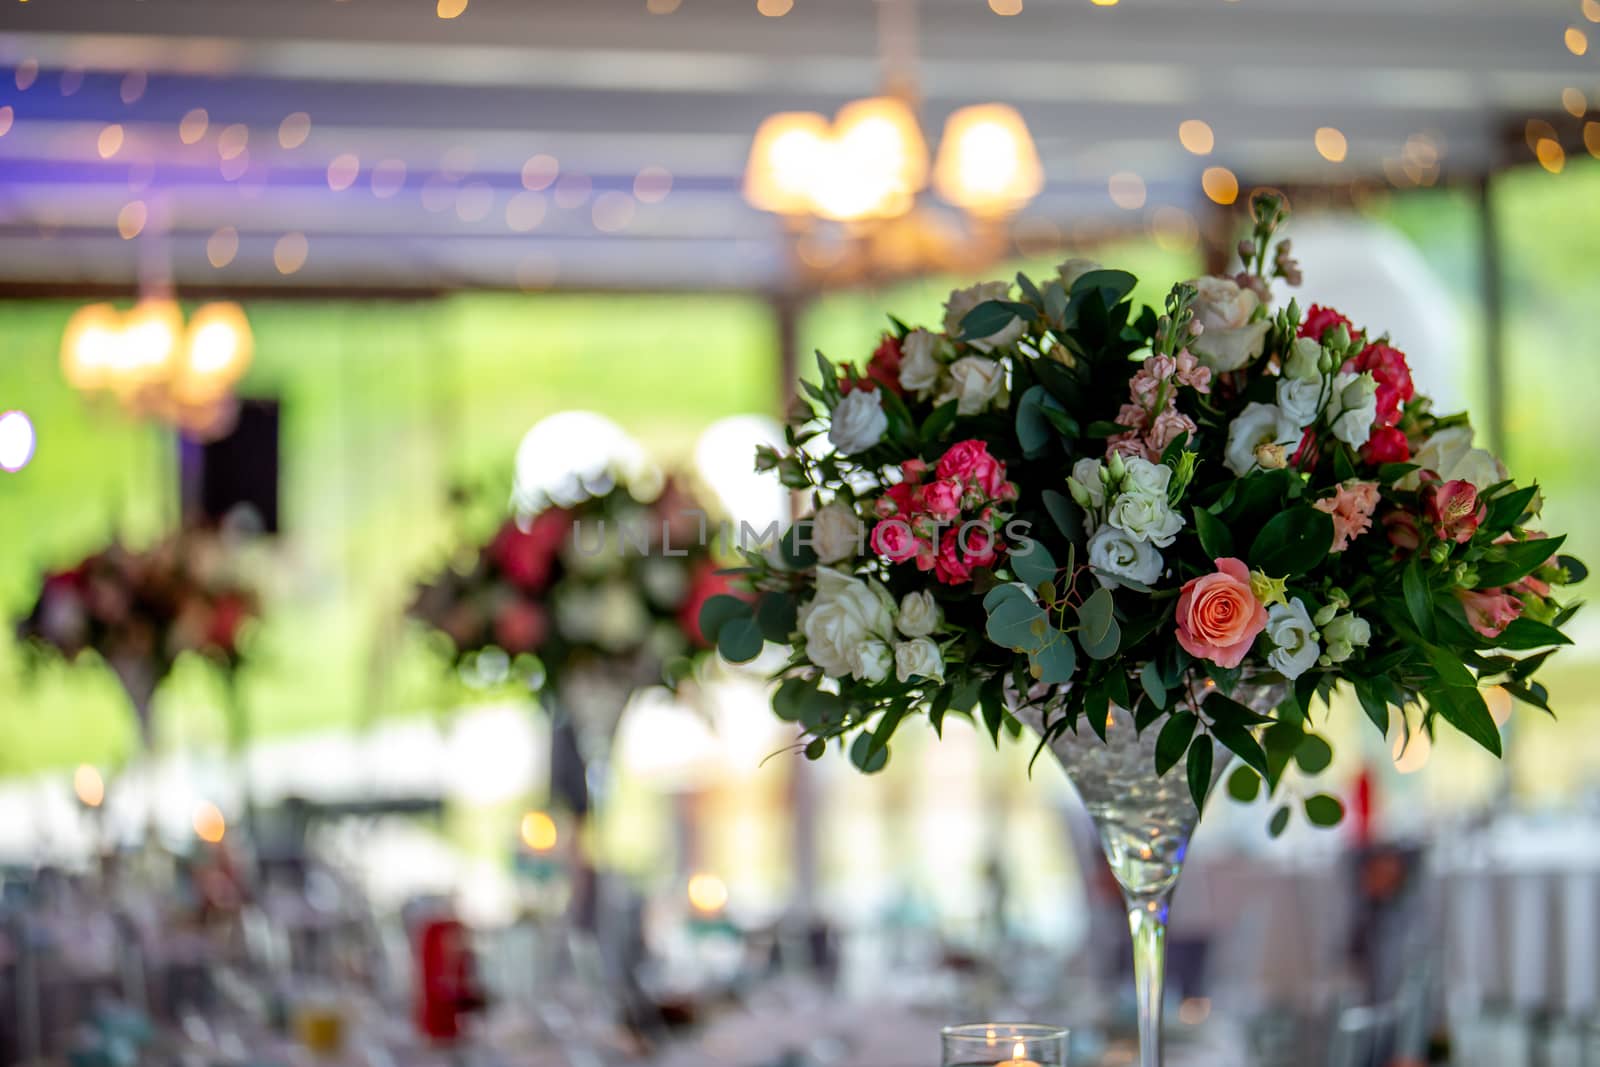 Wedding table decorated with flowers  by fotorobs